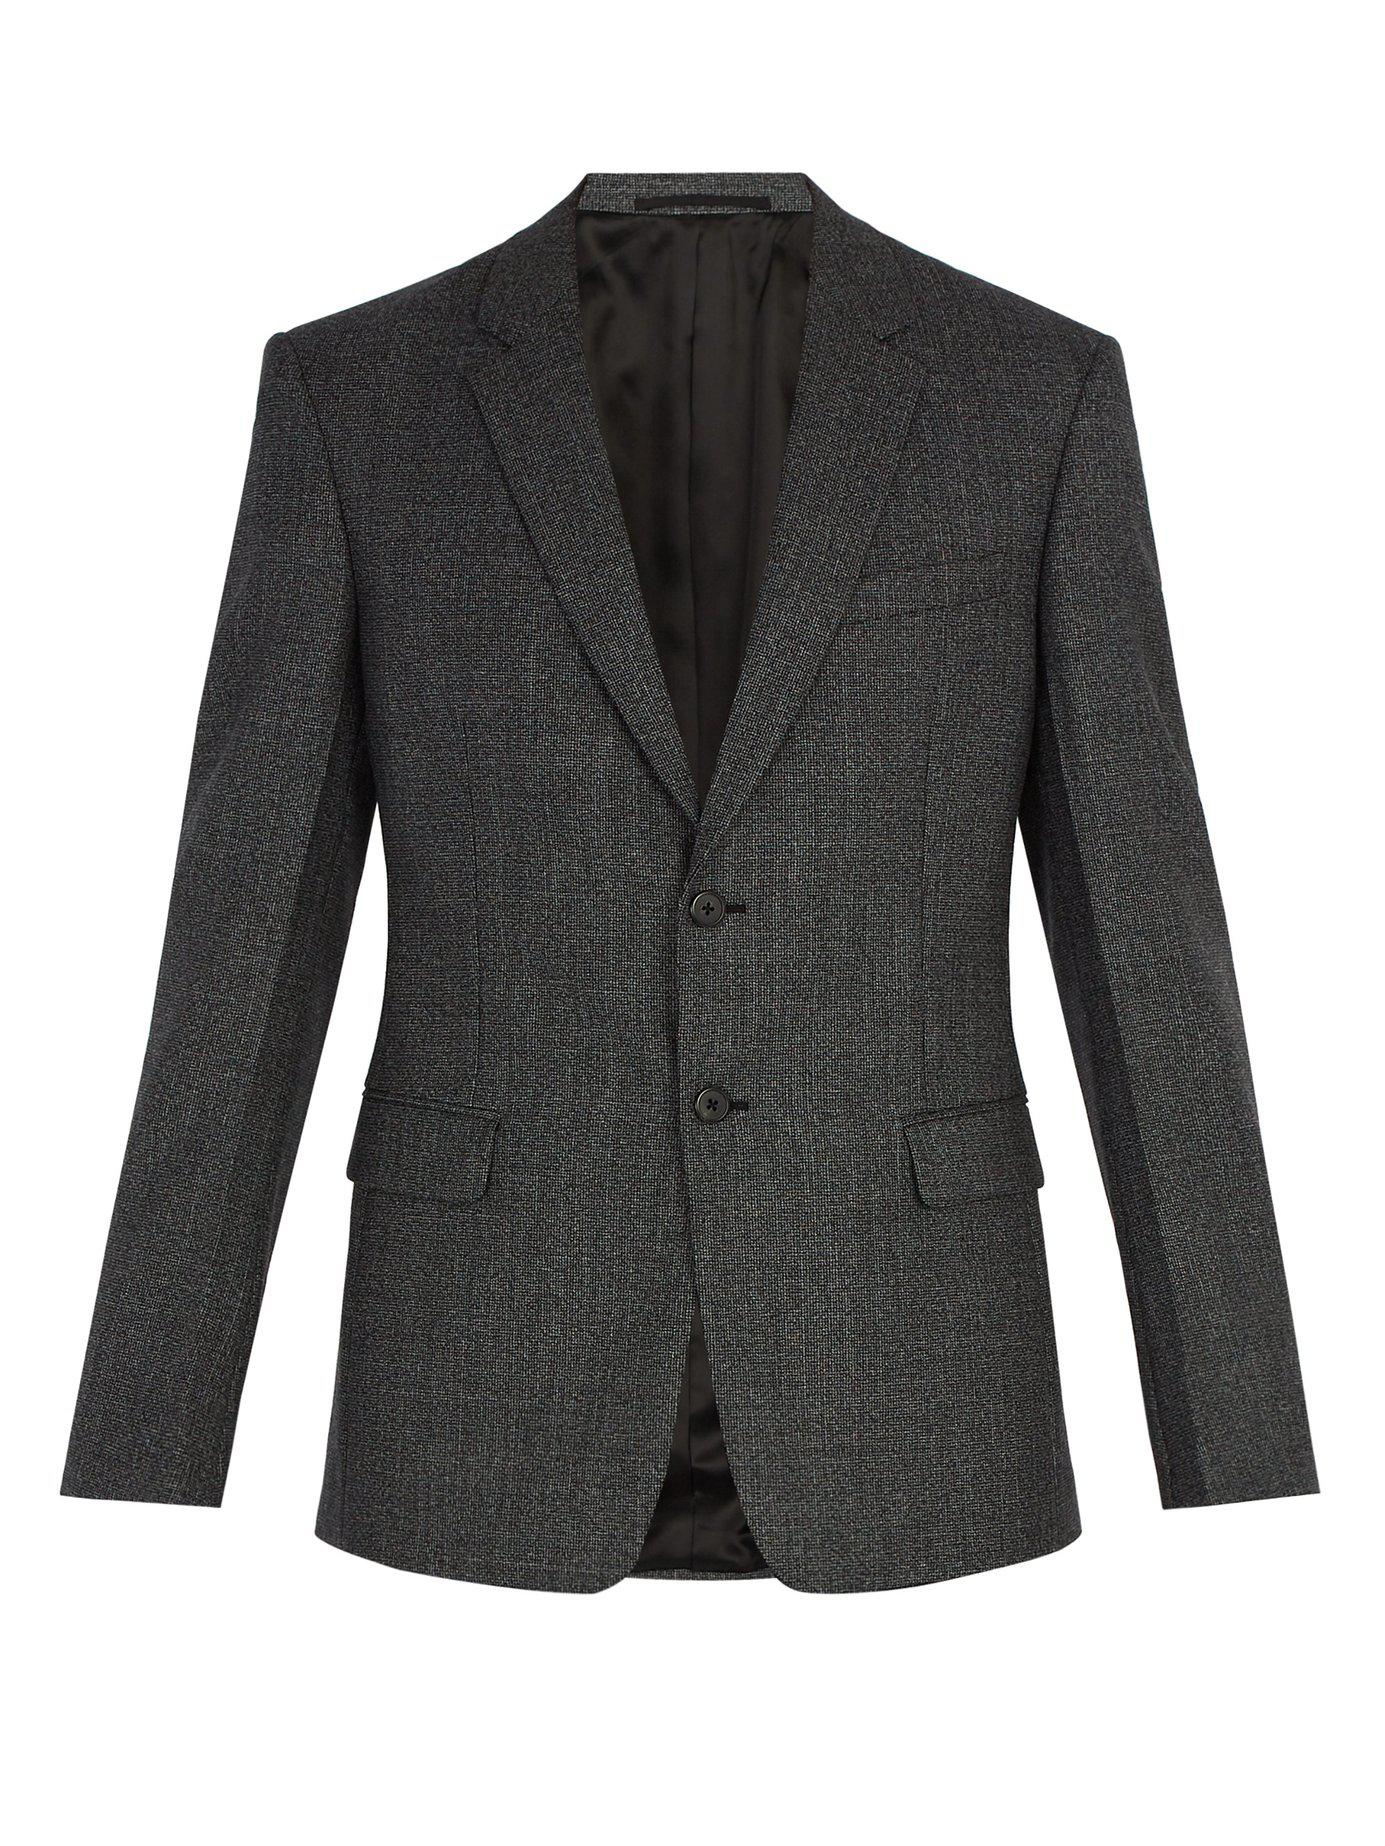 Prada Two Button Wool Suit Jacket in Grey (Gray) for Men - Lyst